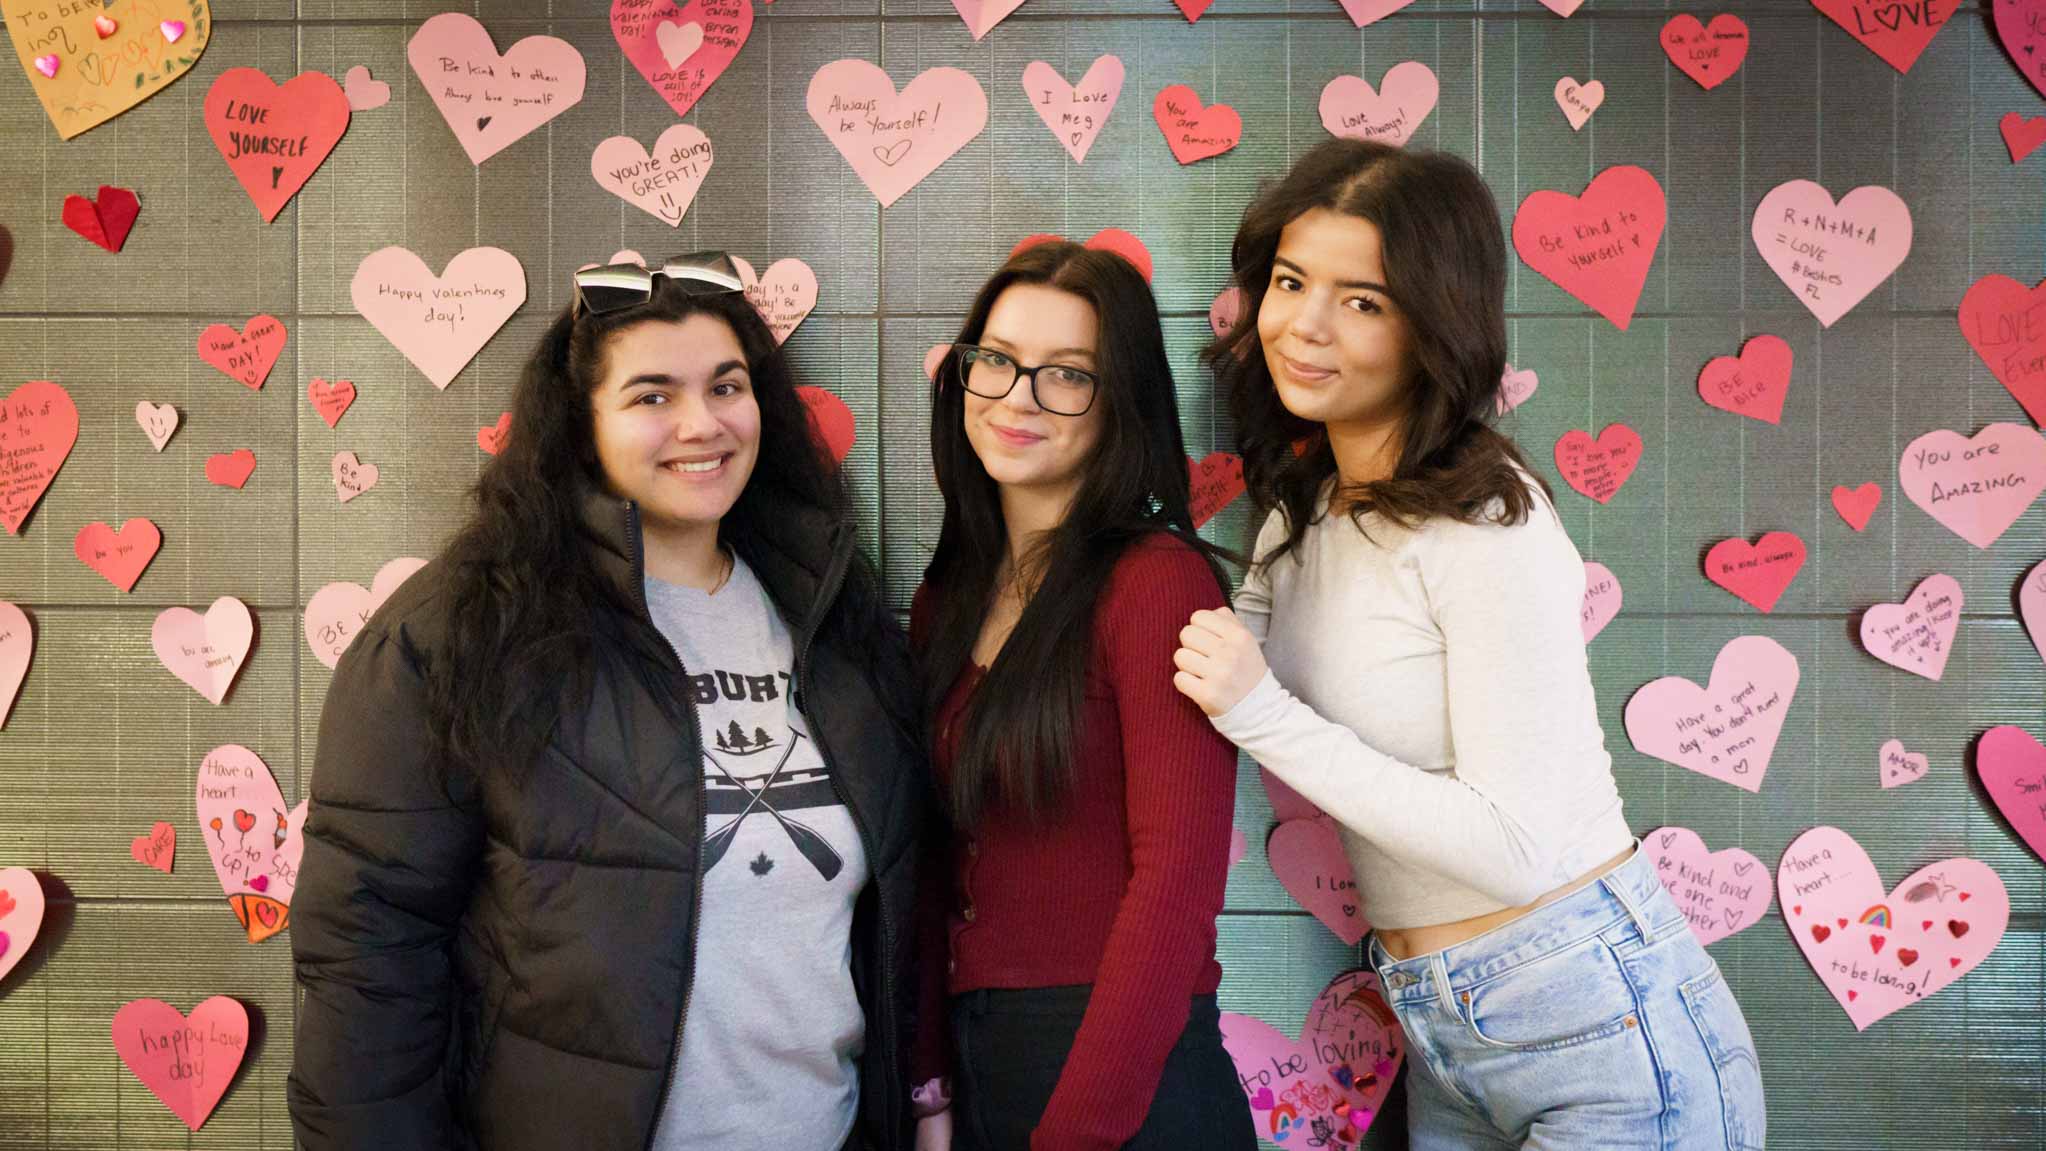 Students stand in front of wall covered in paper hearts